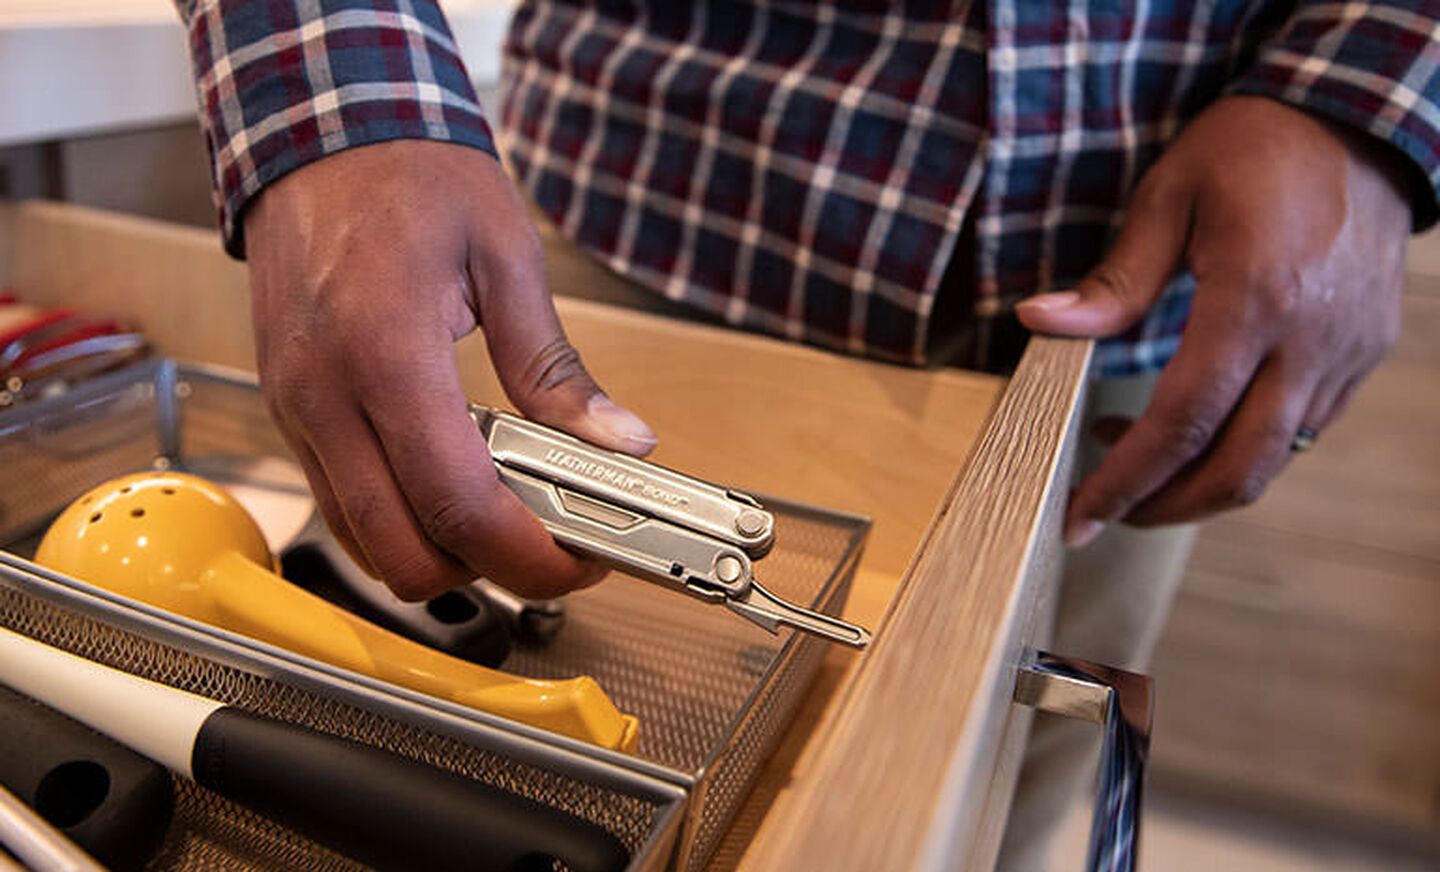 Man in red, white and blue plaid shirt holding Leatherman bond by kitchen drawer